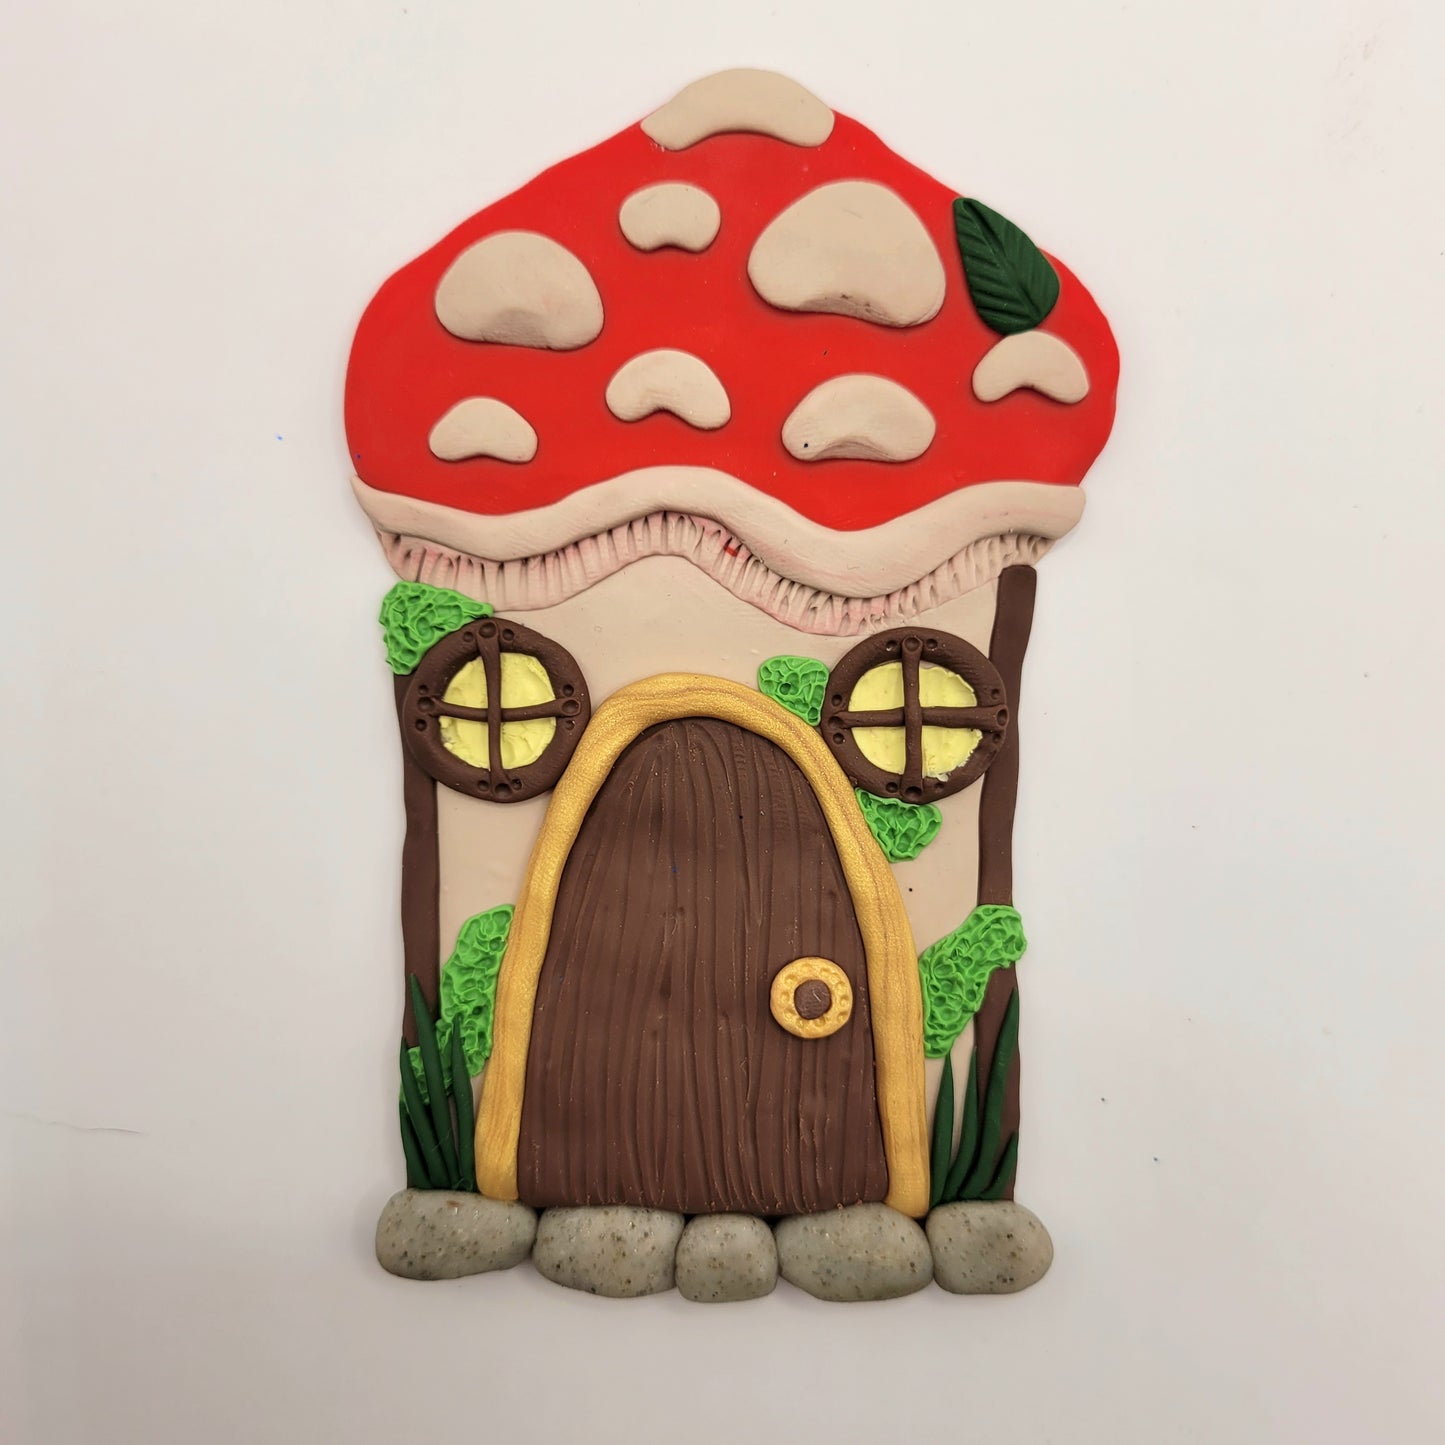 The mushroom door rests on a white background. The mushroom's cap is bright red with beige textured spots and a green leaf. The stem of the mushroom is beige and is detailed with two windows, a door, green moss and grass, and a cobblestone step.